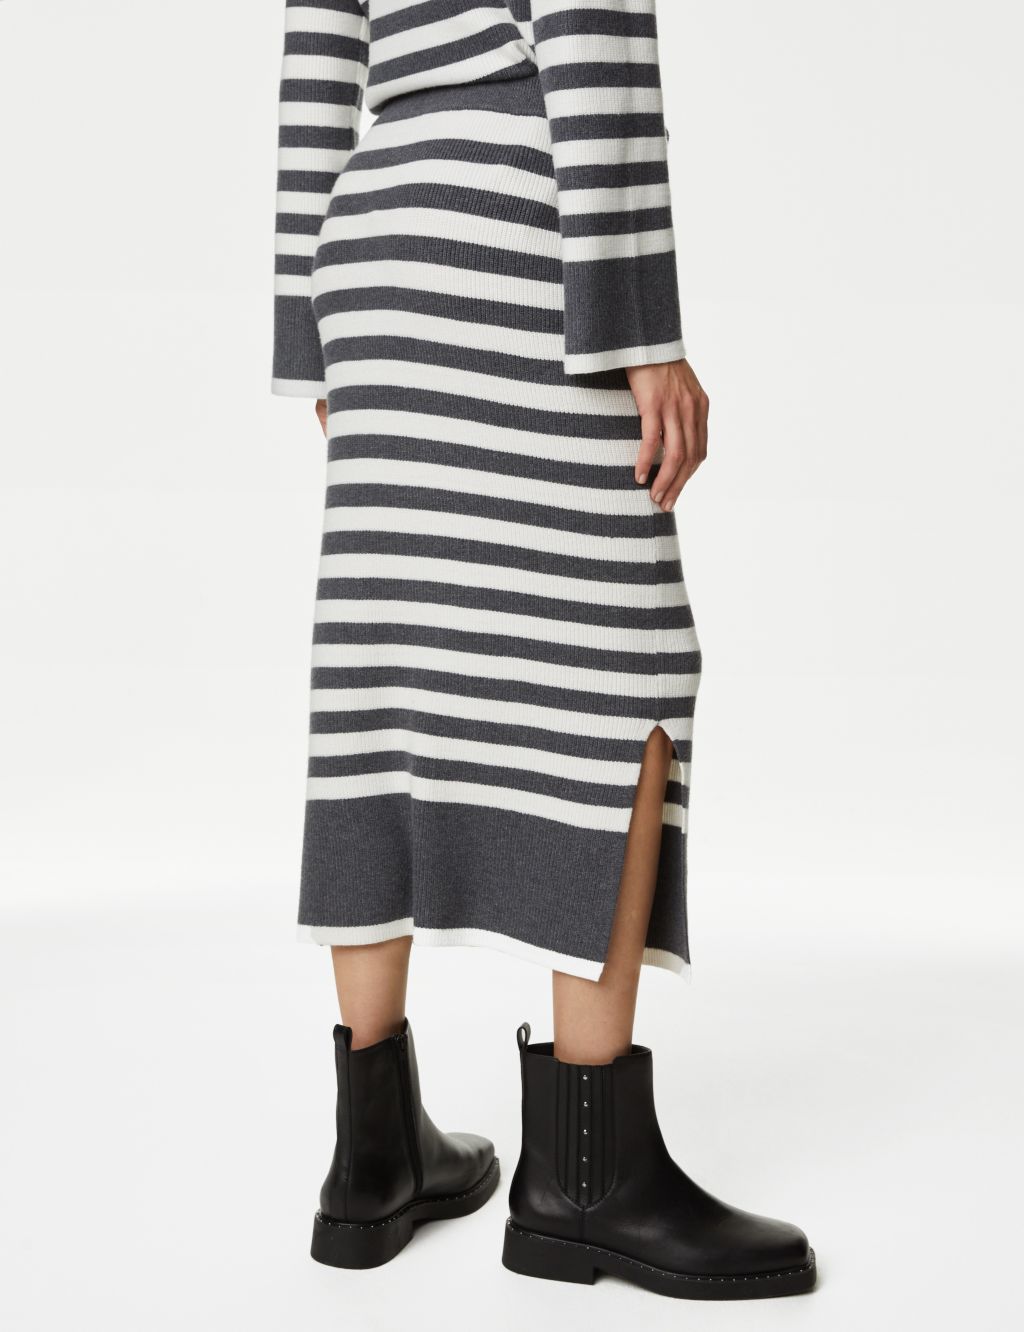 Striped Knitted Midi Skirt image 5